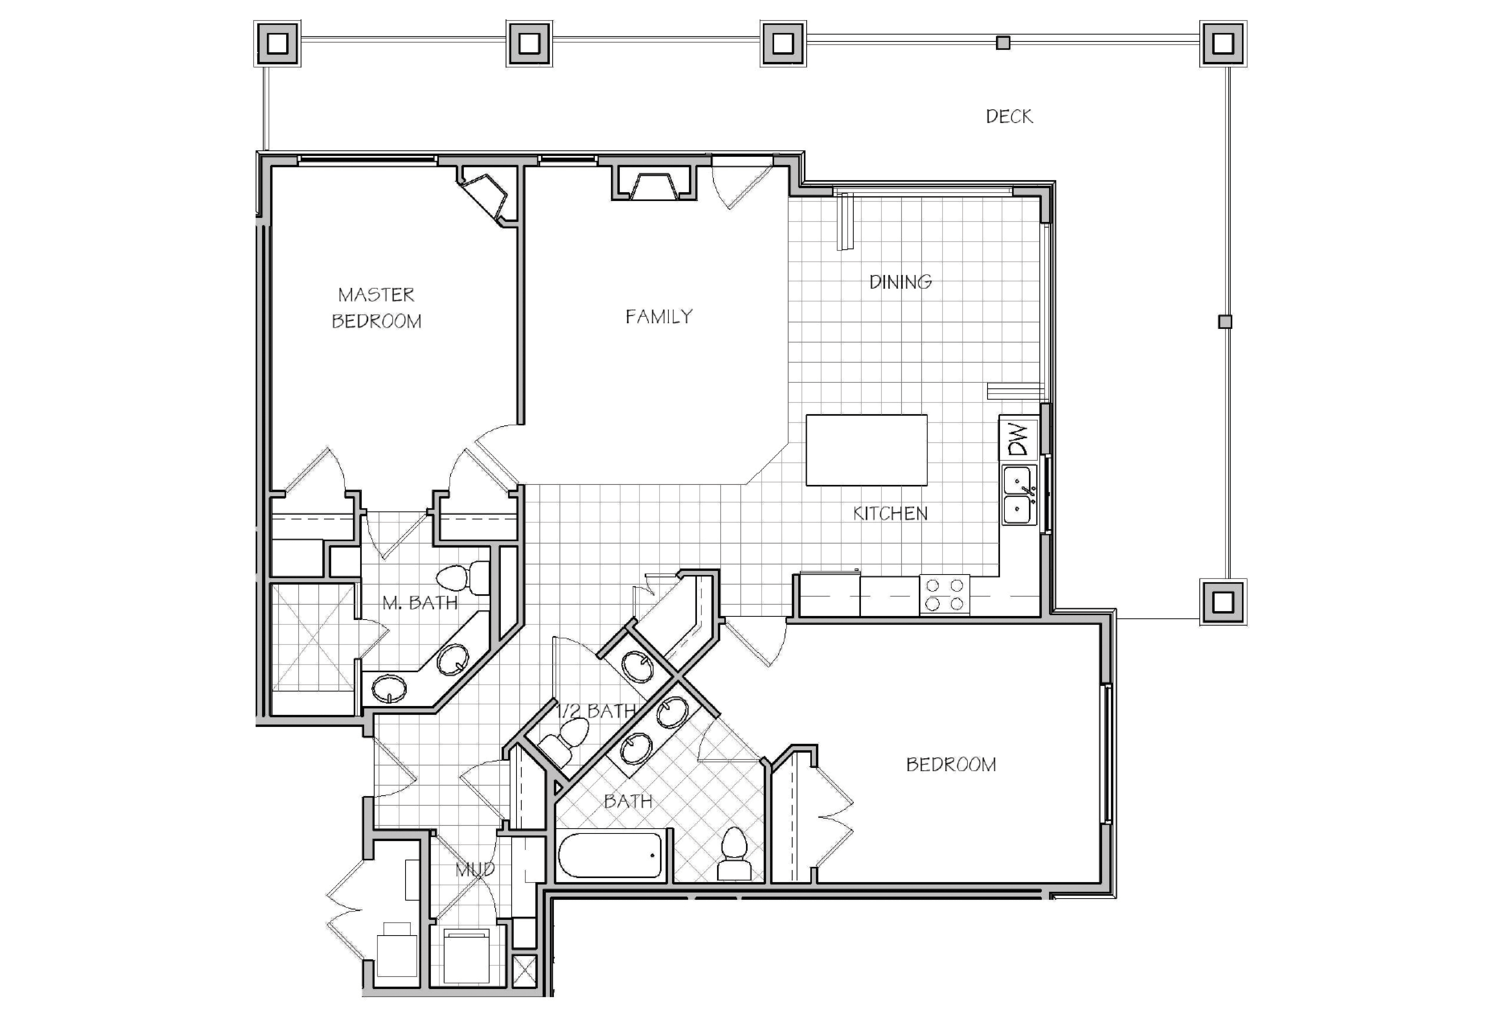 Floor plan -- Freemont Grand (superior to Freemont) with the largest 2 bedroom square footage in the building